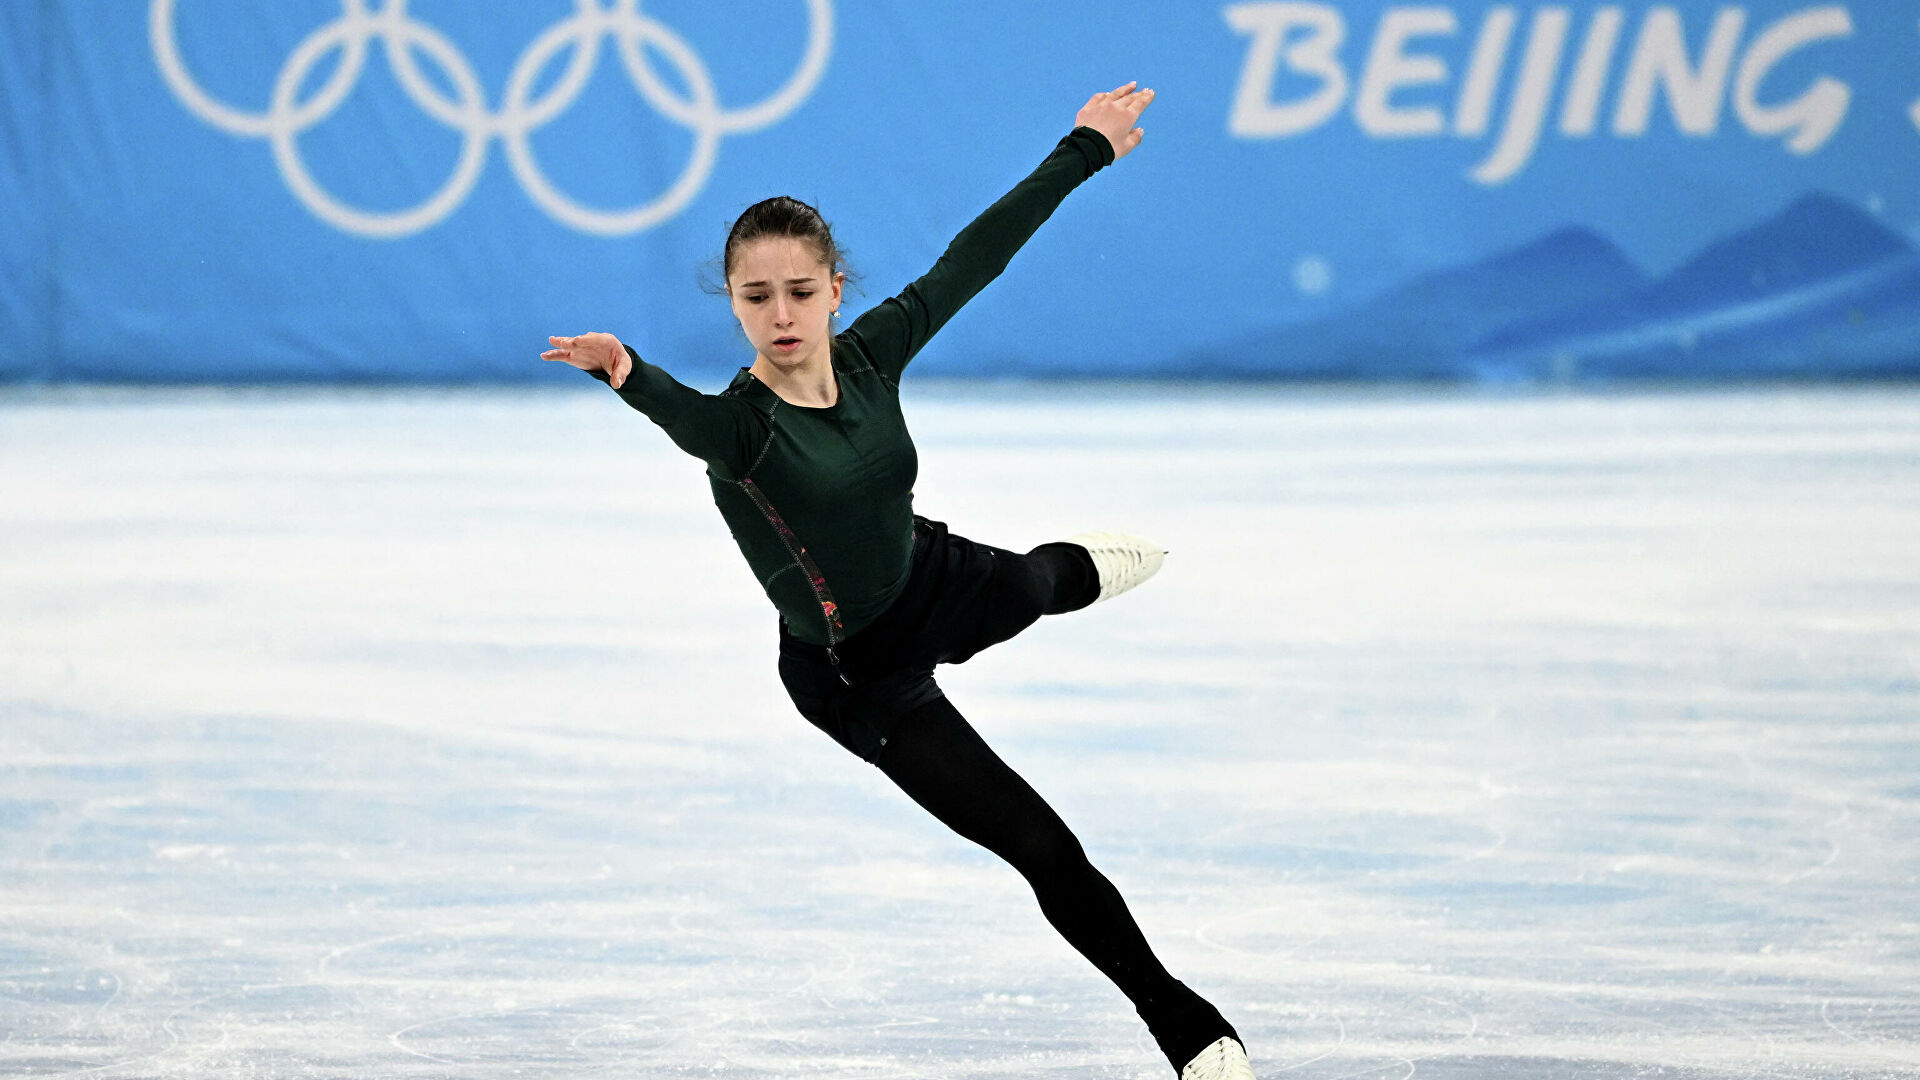 Single Skating: Kamila Valieva during a training session, The 2022 Beijing Winter Olympic Games. 1920x1080 Full HD Wallpaper.